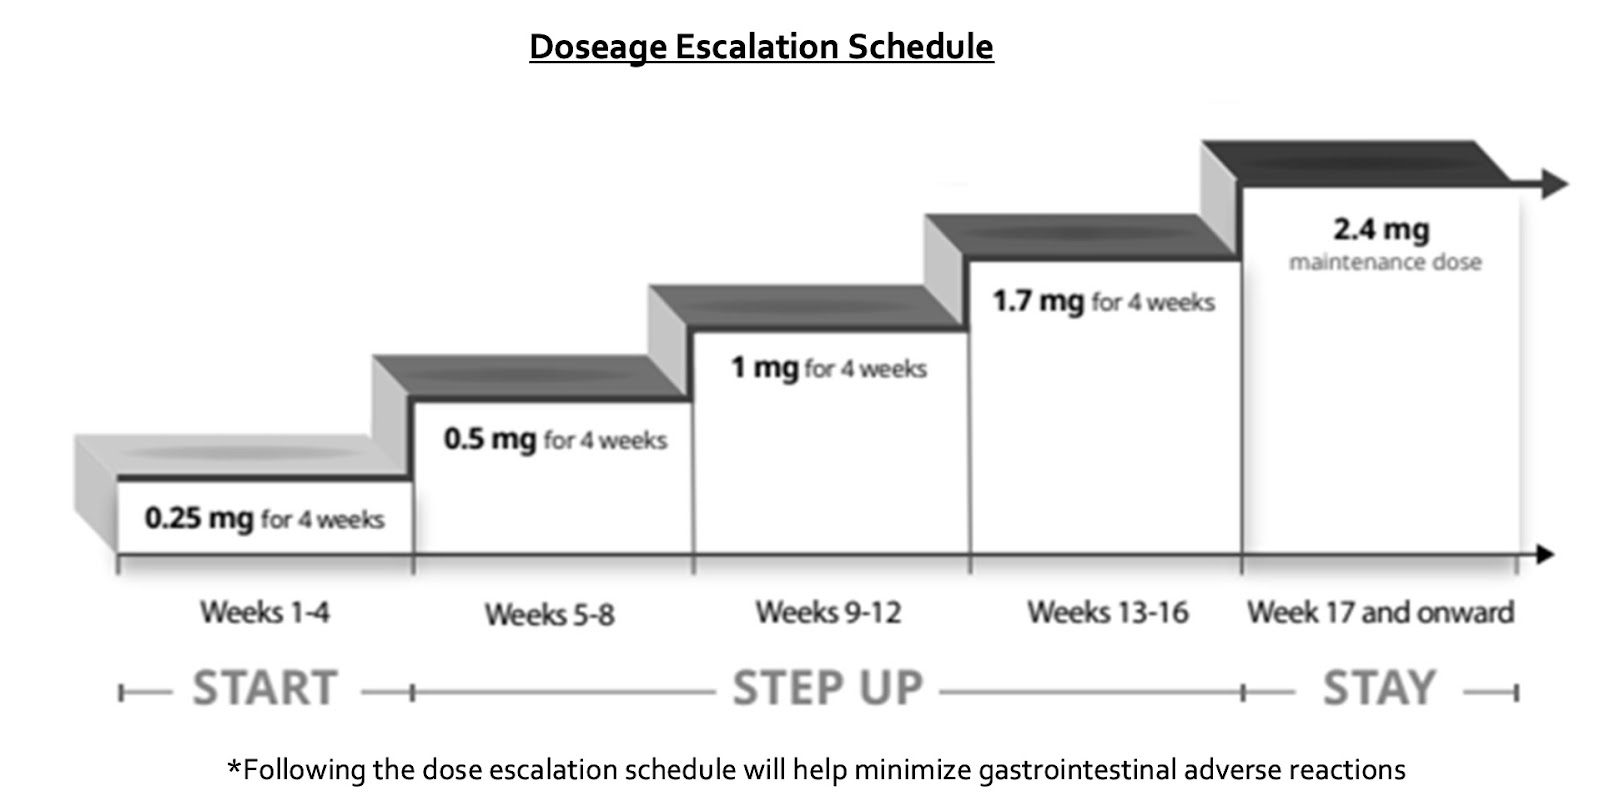 Doseage Escalation Schedule - Weight Loss Programs